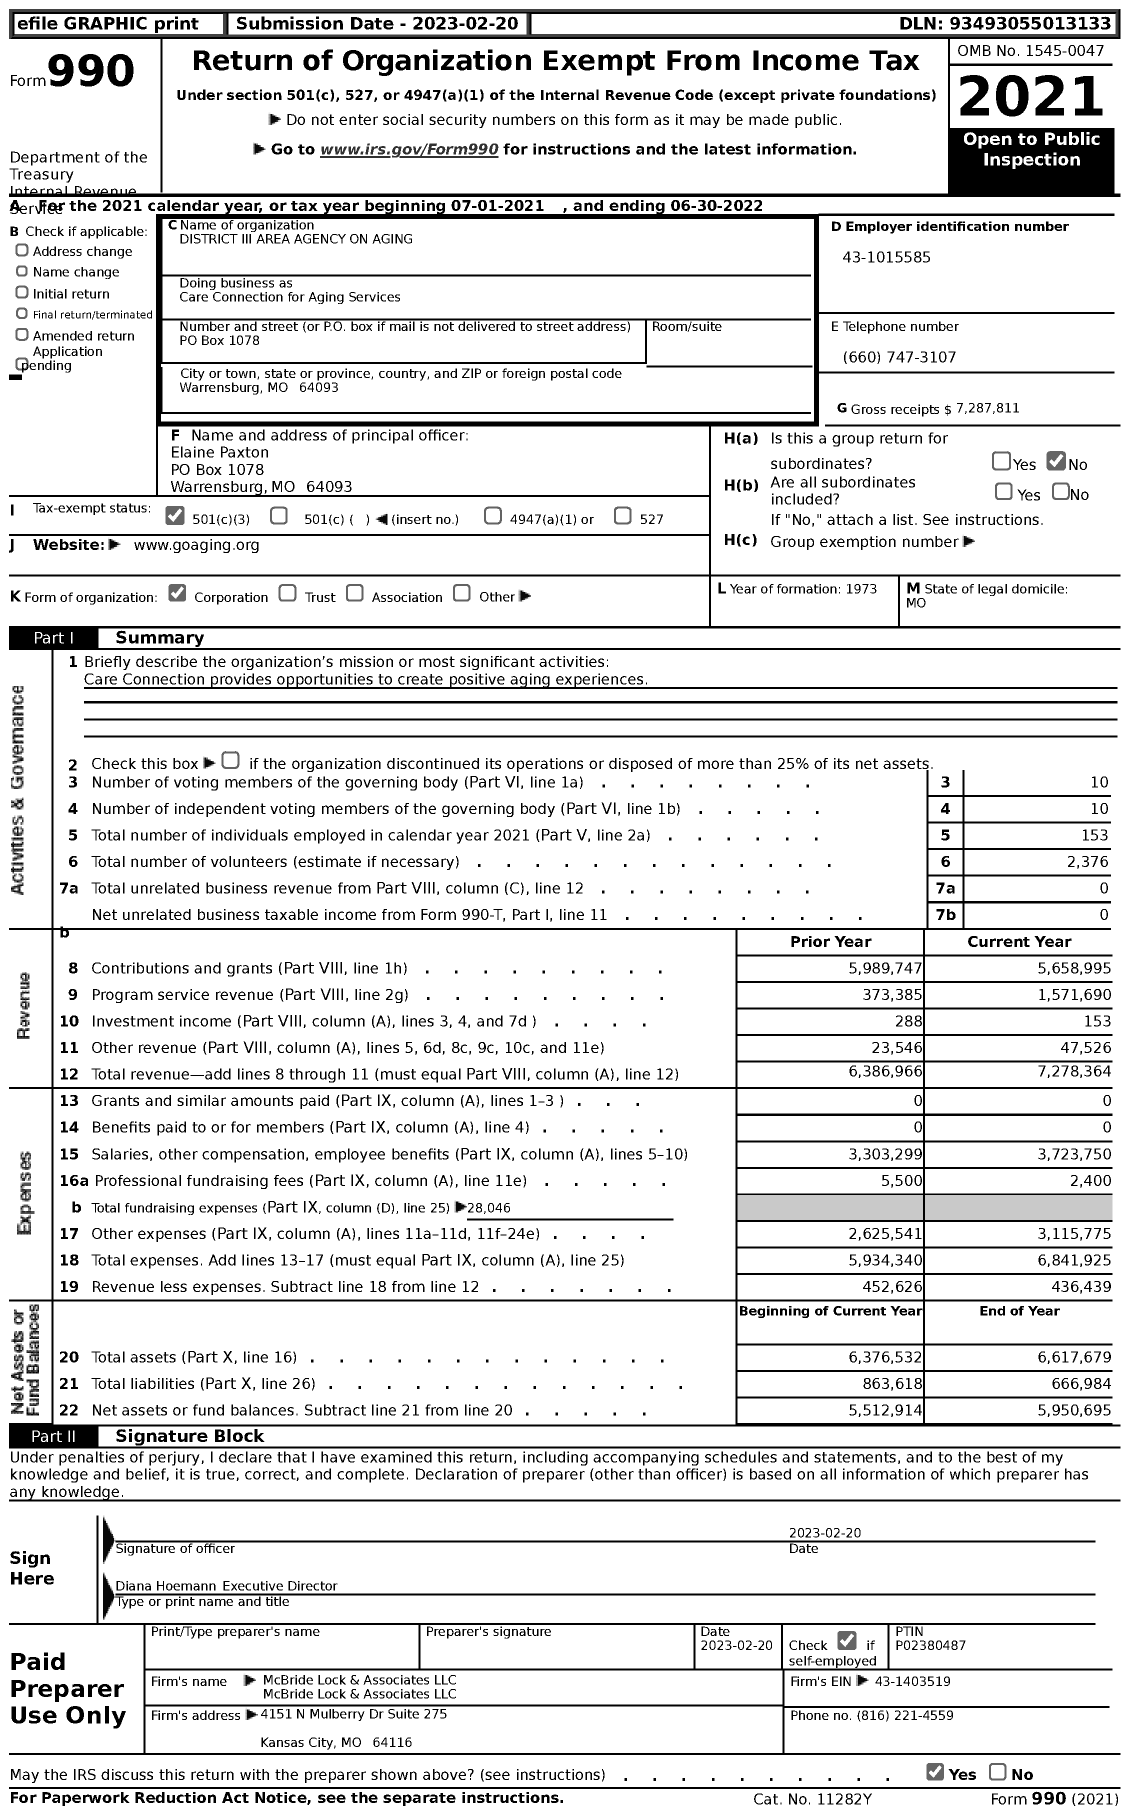 Image of first page of 2021 Form 990 for Care Connection for Aging Services